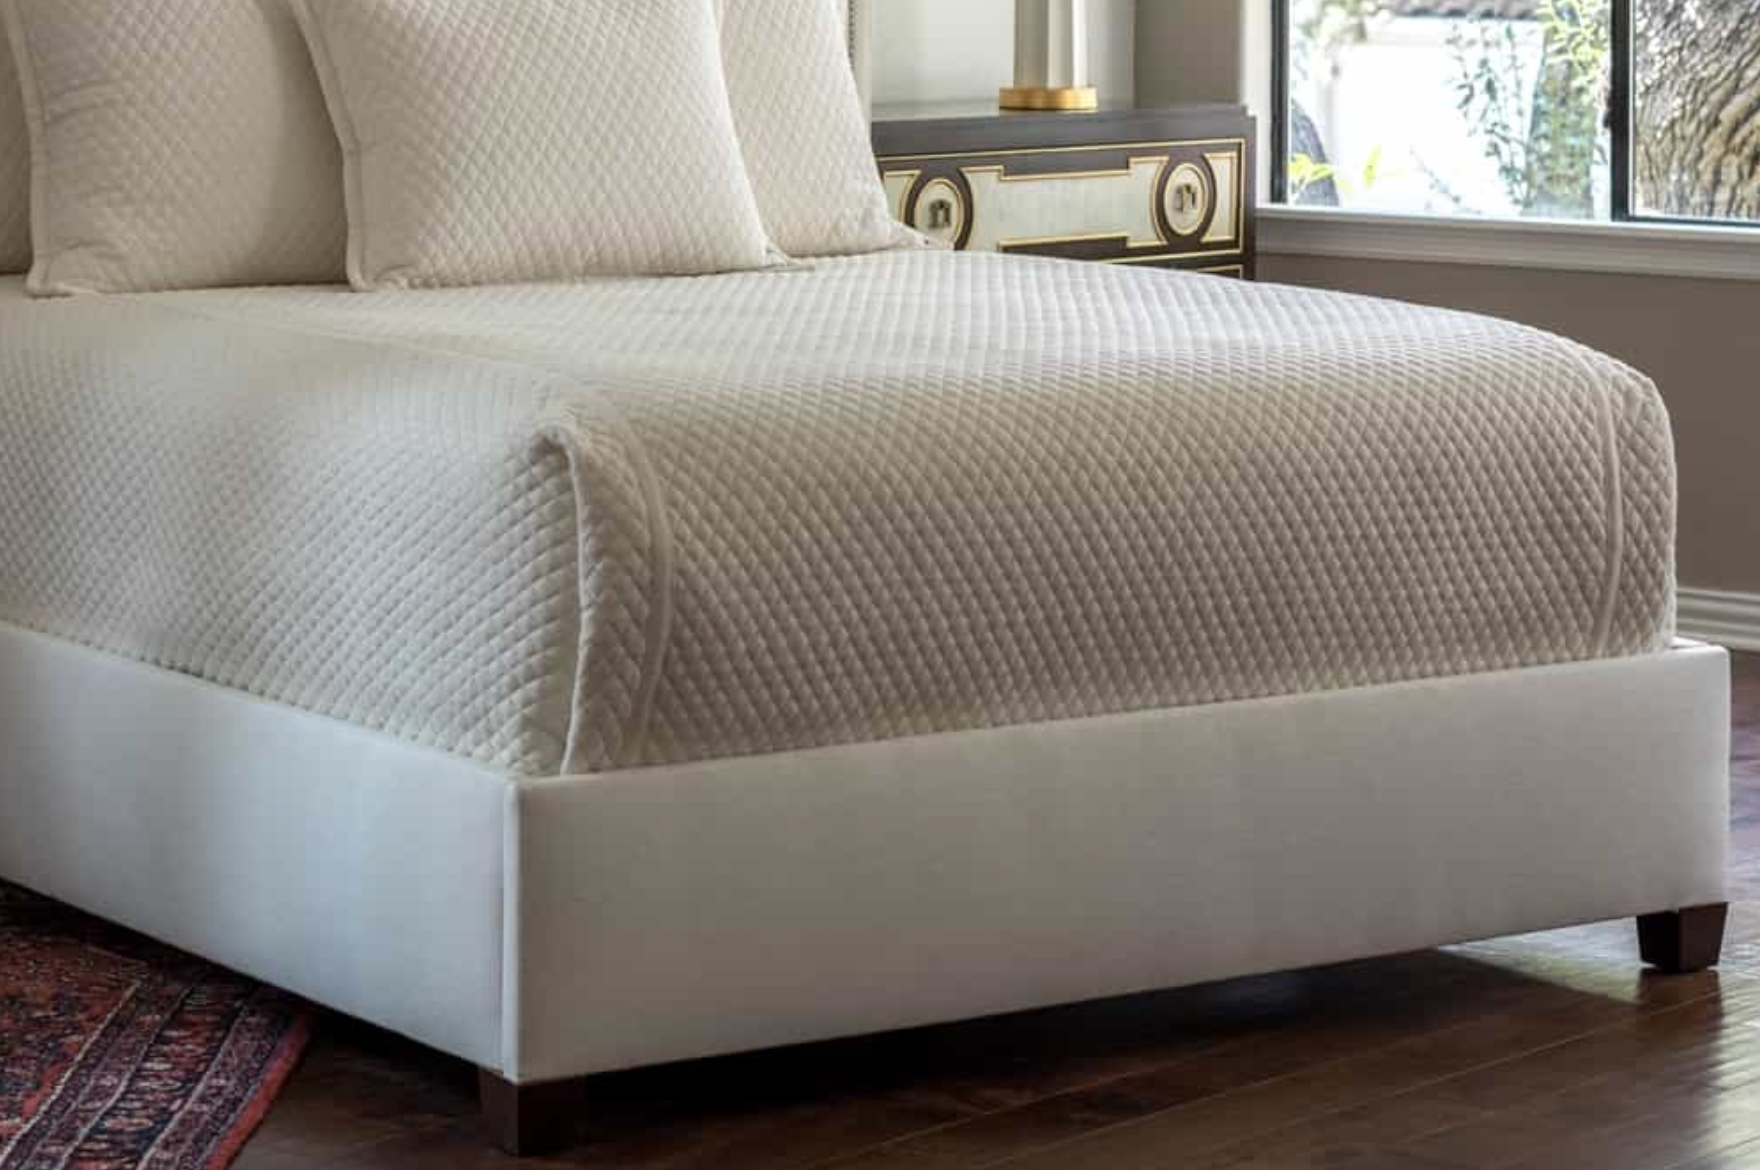 Lili Alessandra Laurie Quilted Ivory Basketweave Coverlet Detail